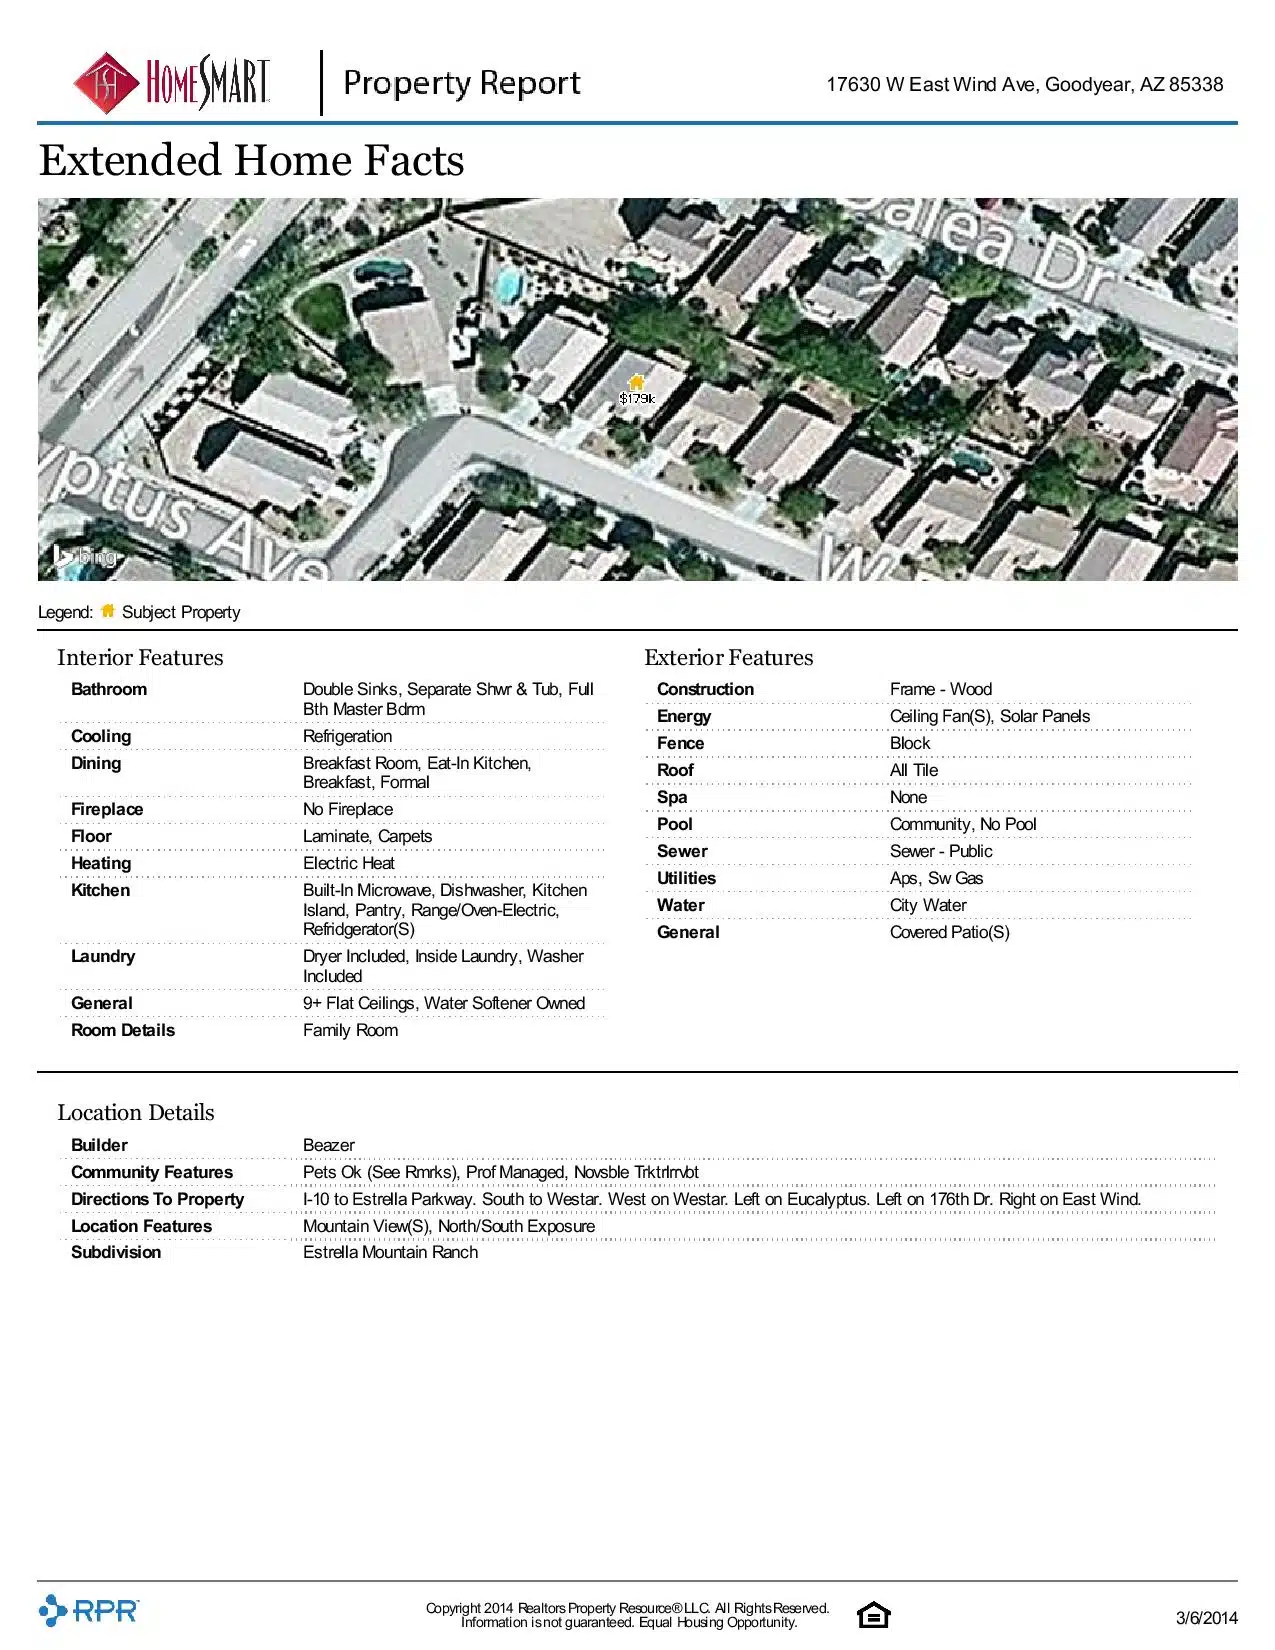 17630-W-East-Wind-Ave-Goodyear-AZ-85338-page-004